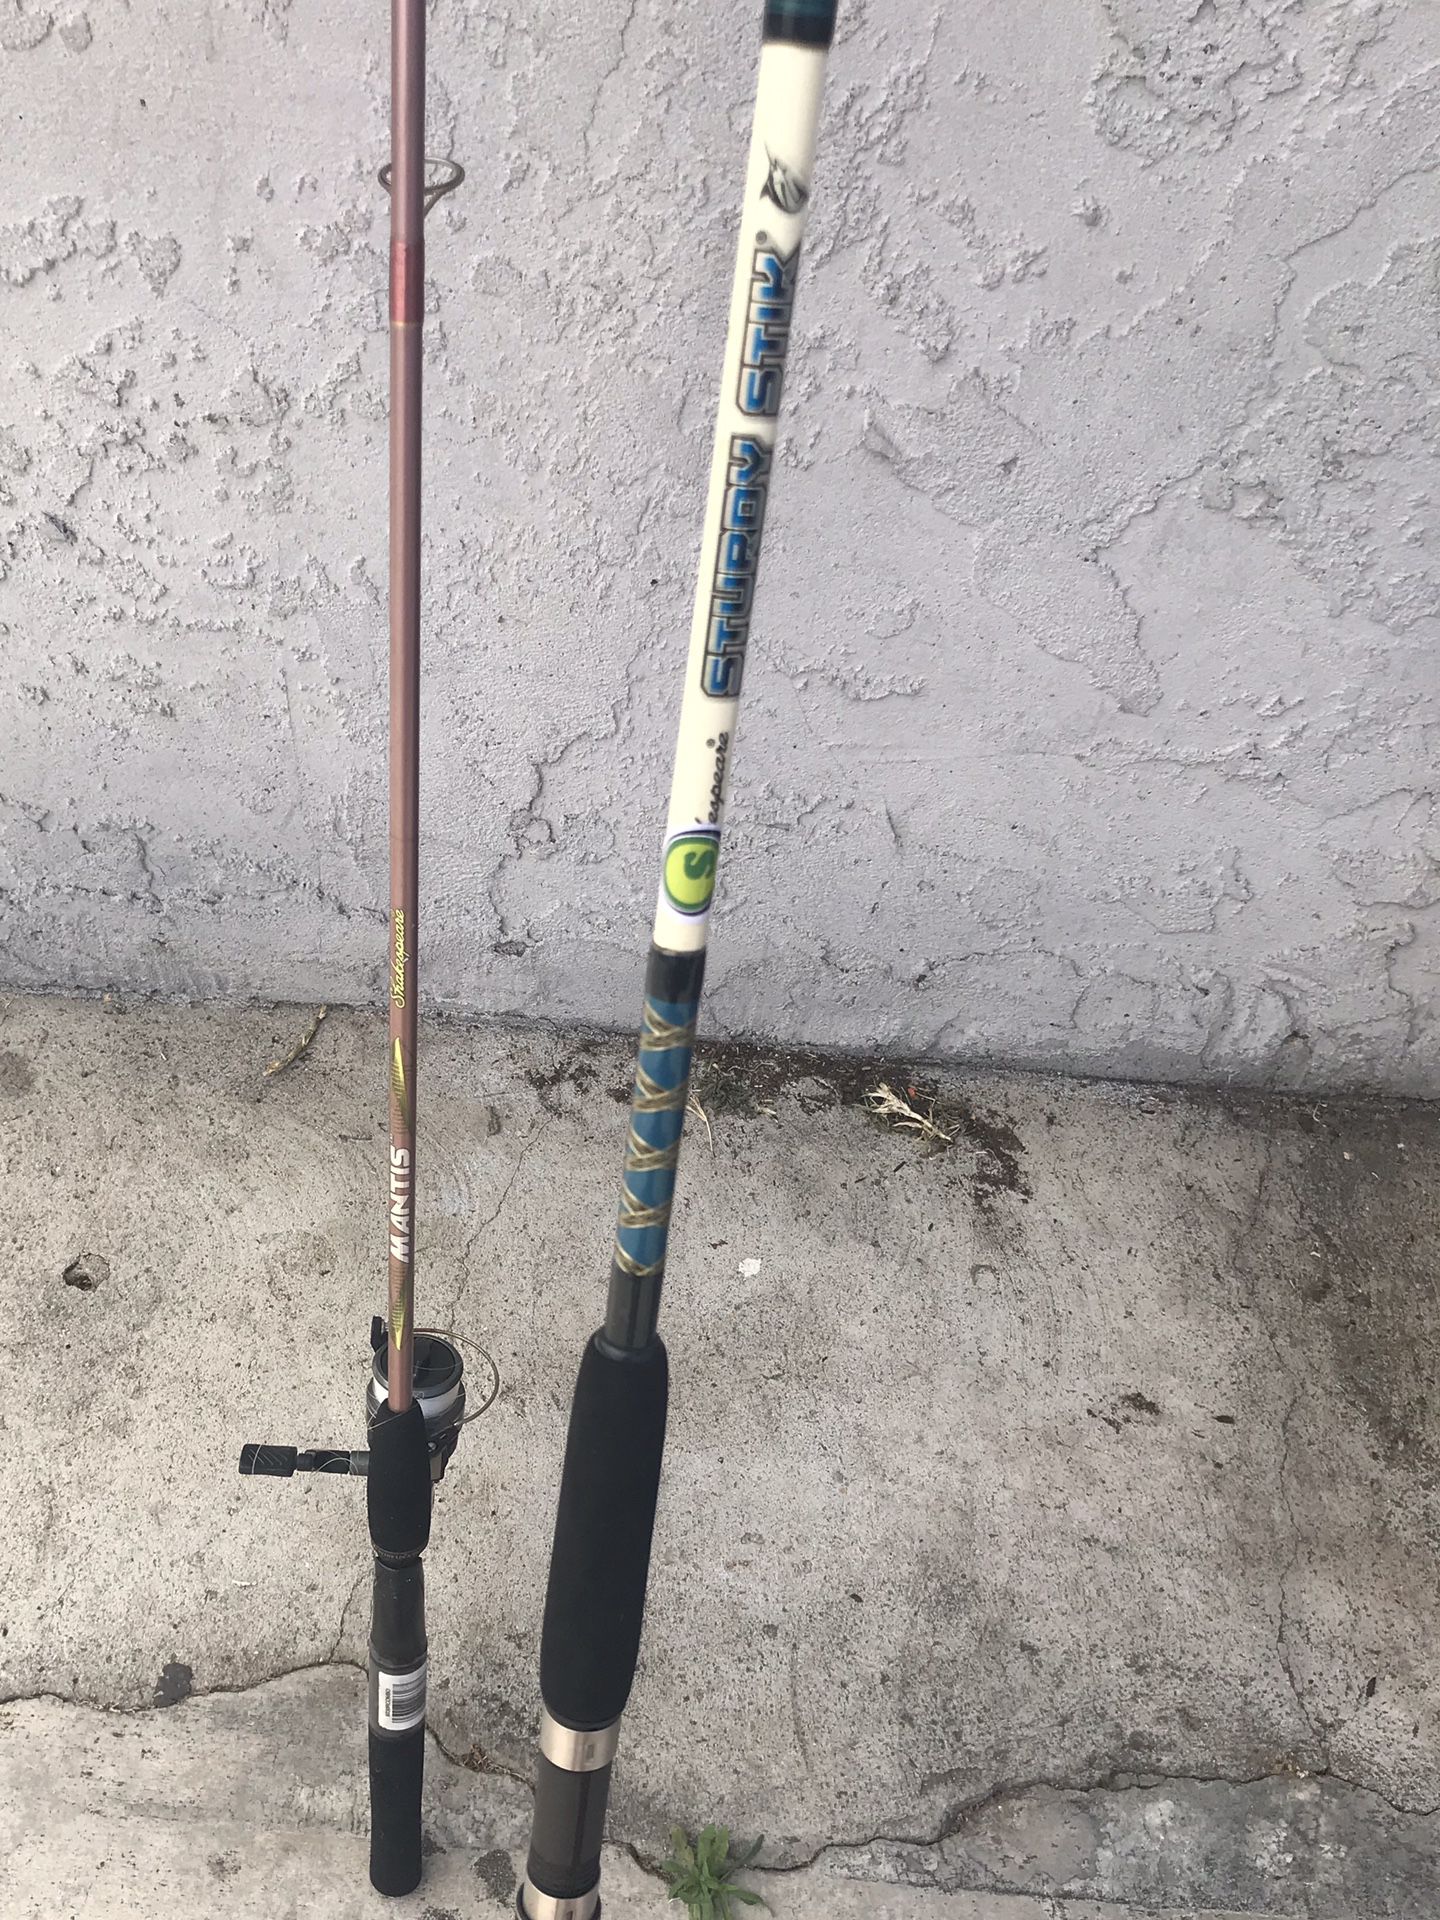 FiSHinG PoLes 🎣 price for BOTH 15$